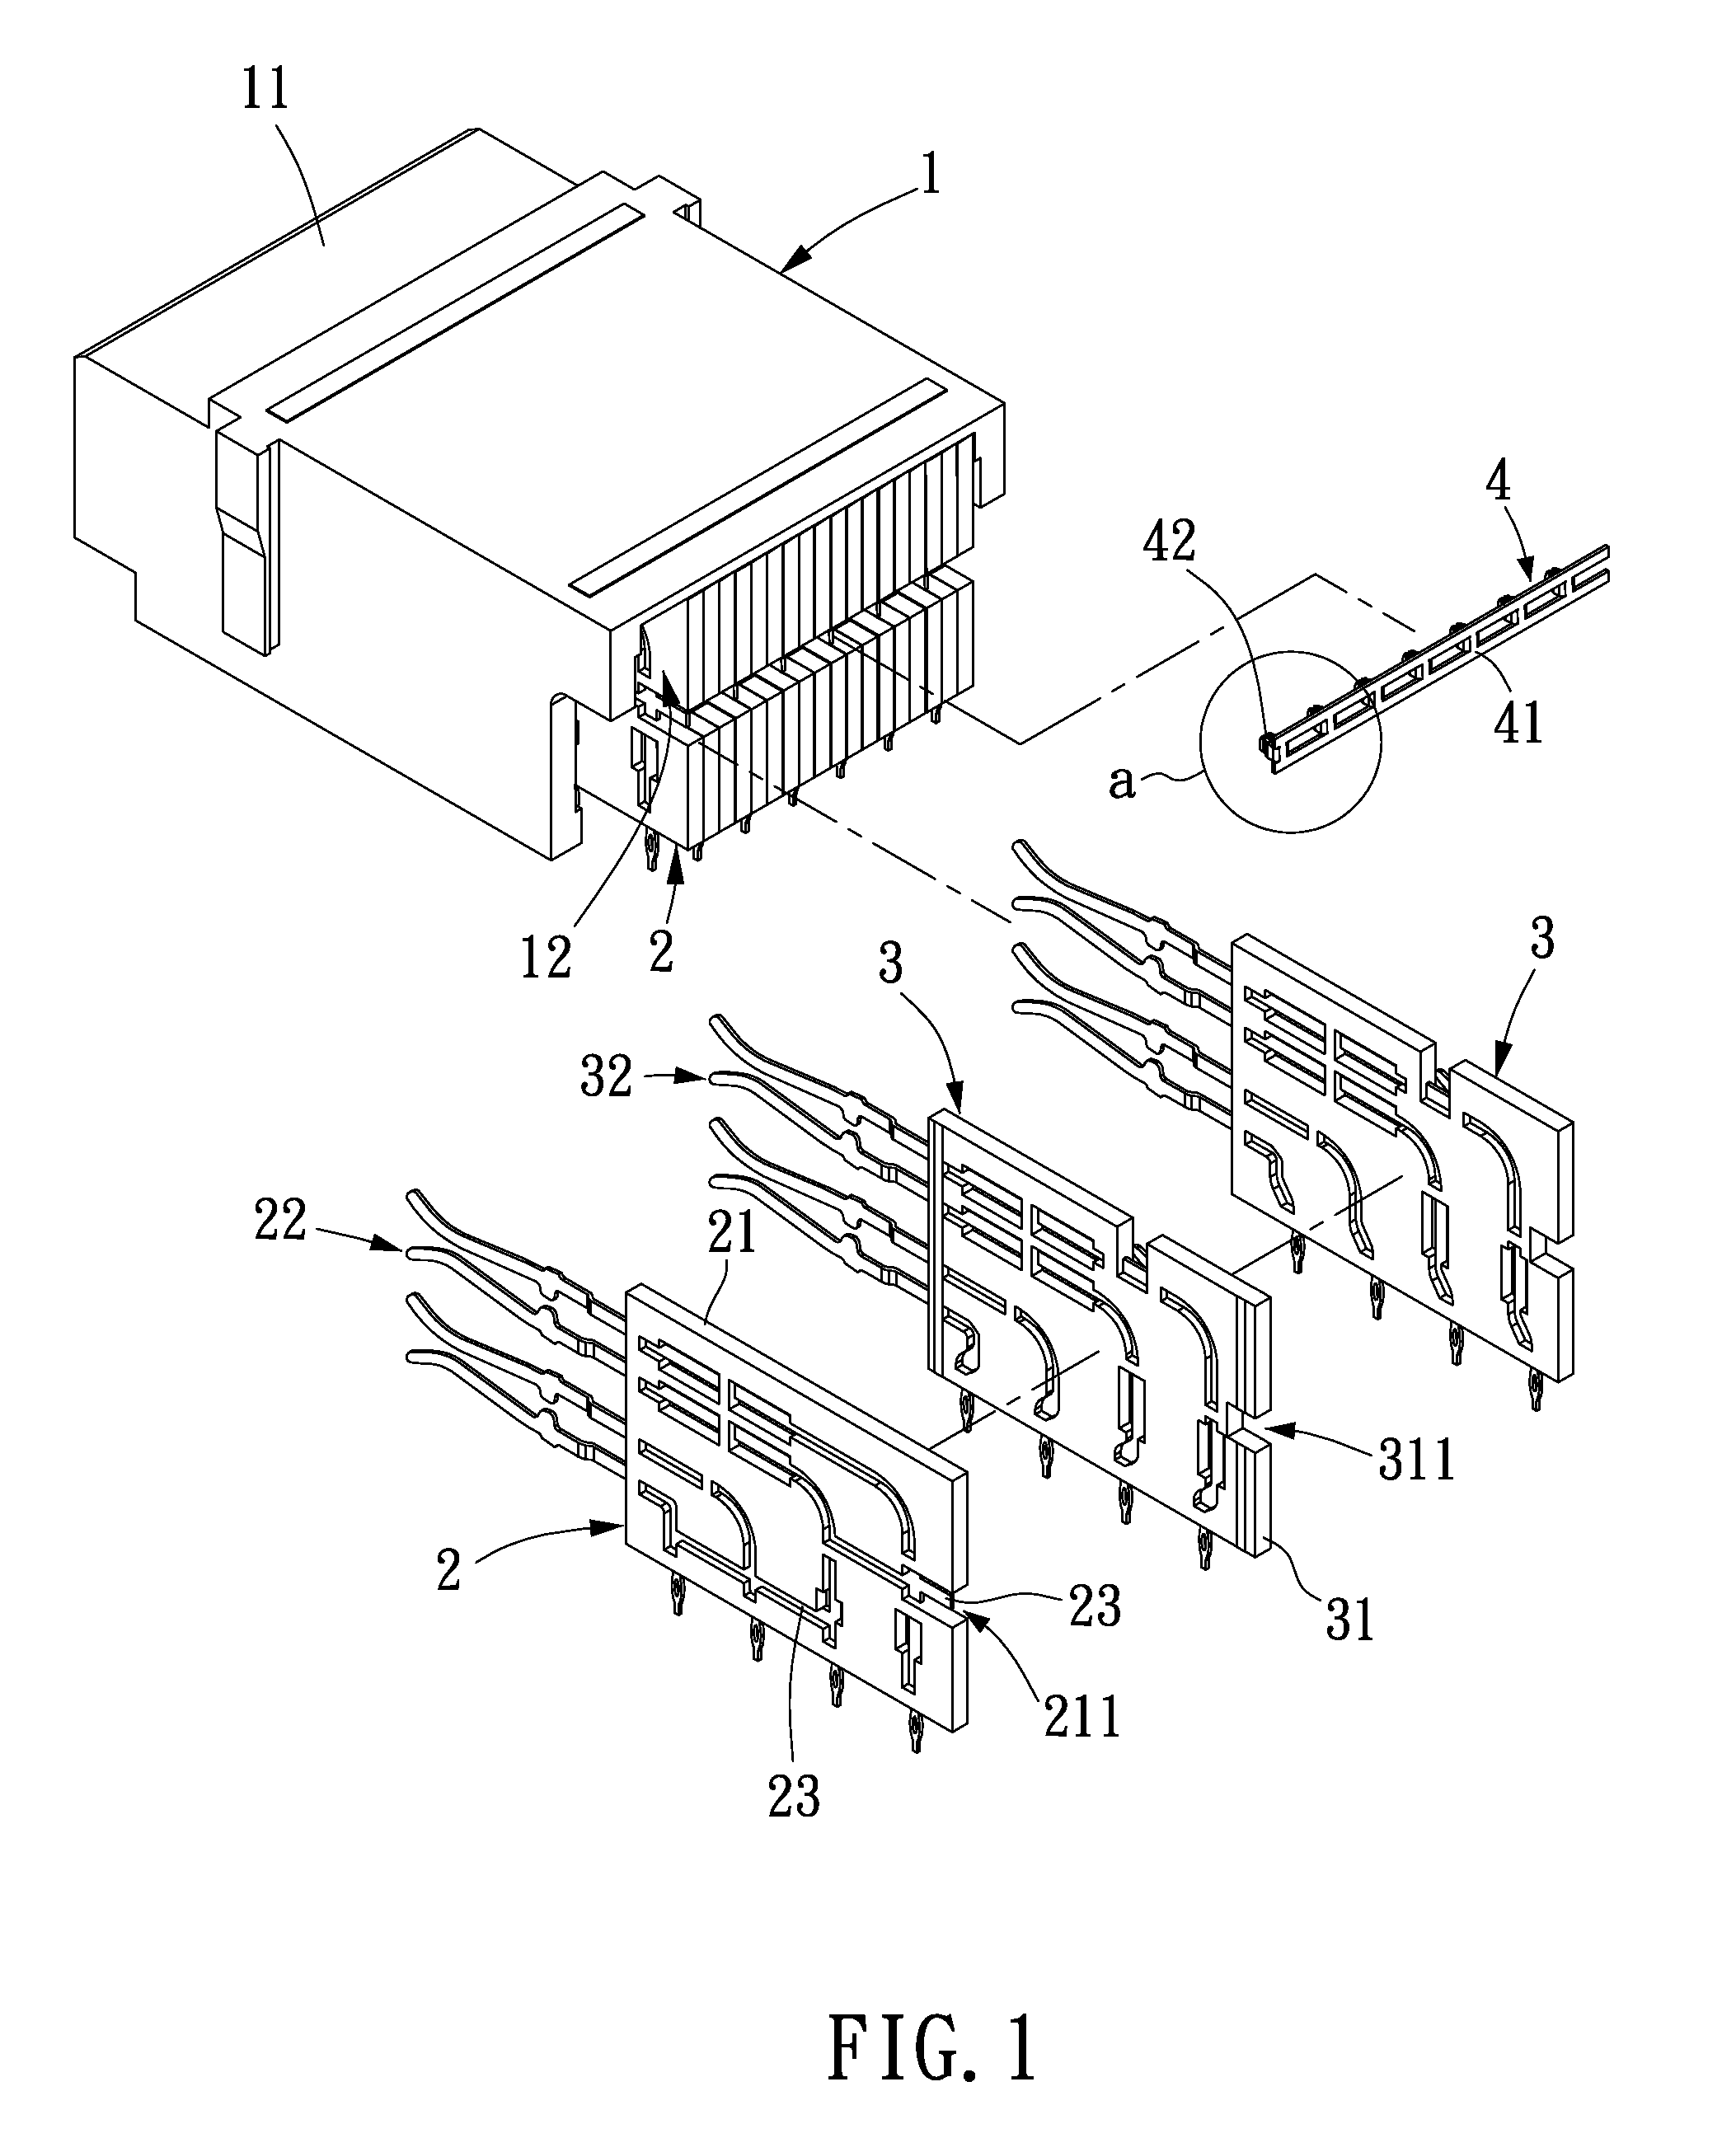 Connector structure